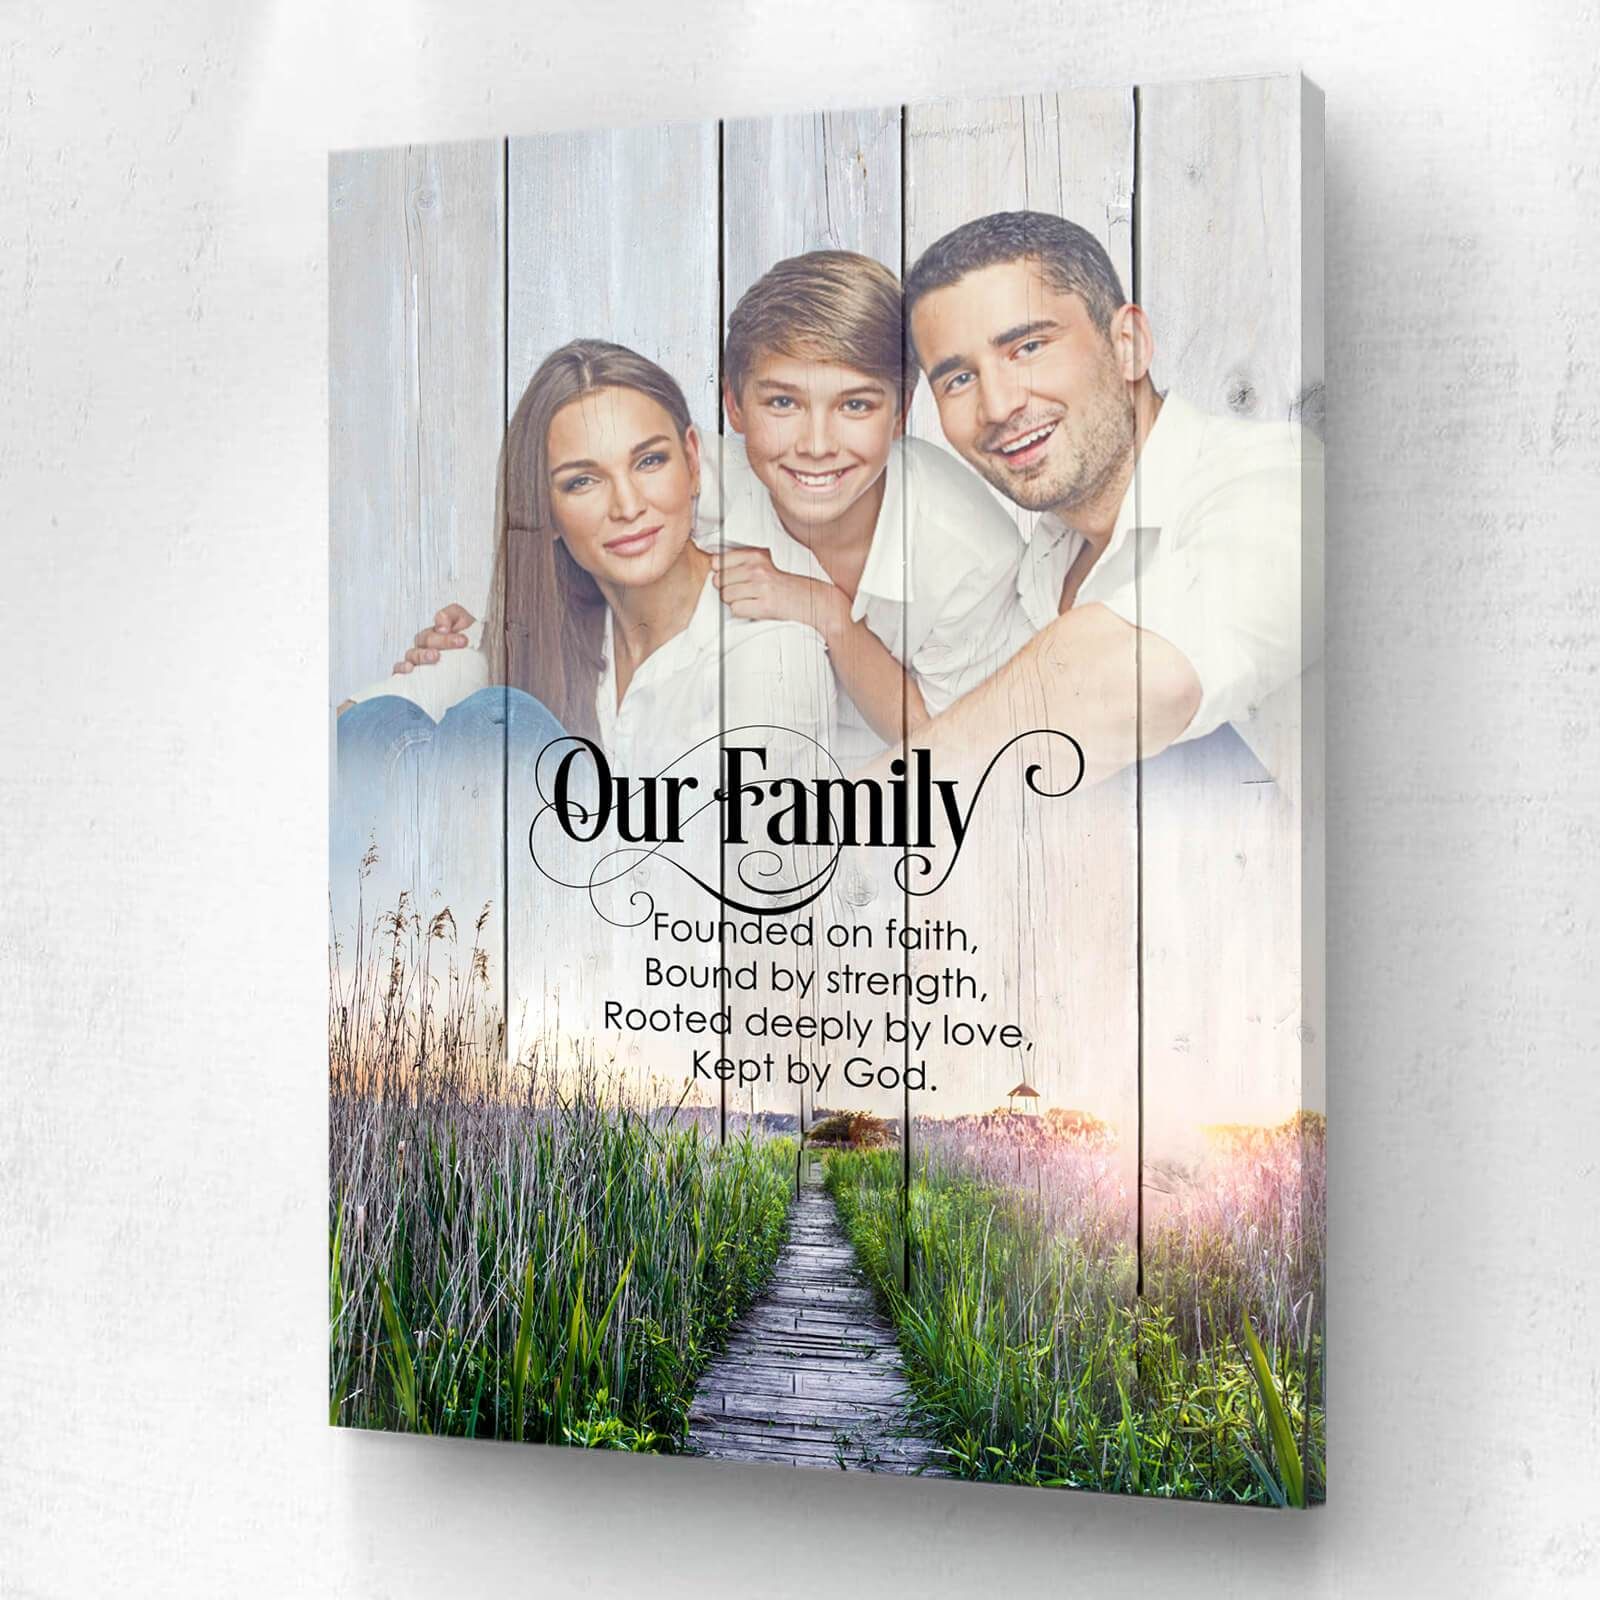 Personalized Gift For Couple Canvas Our Family Founded On Faith Bound By Strength PAN